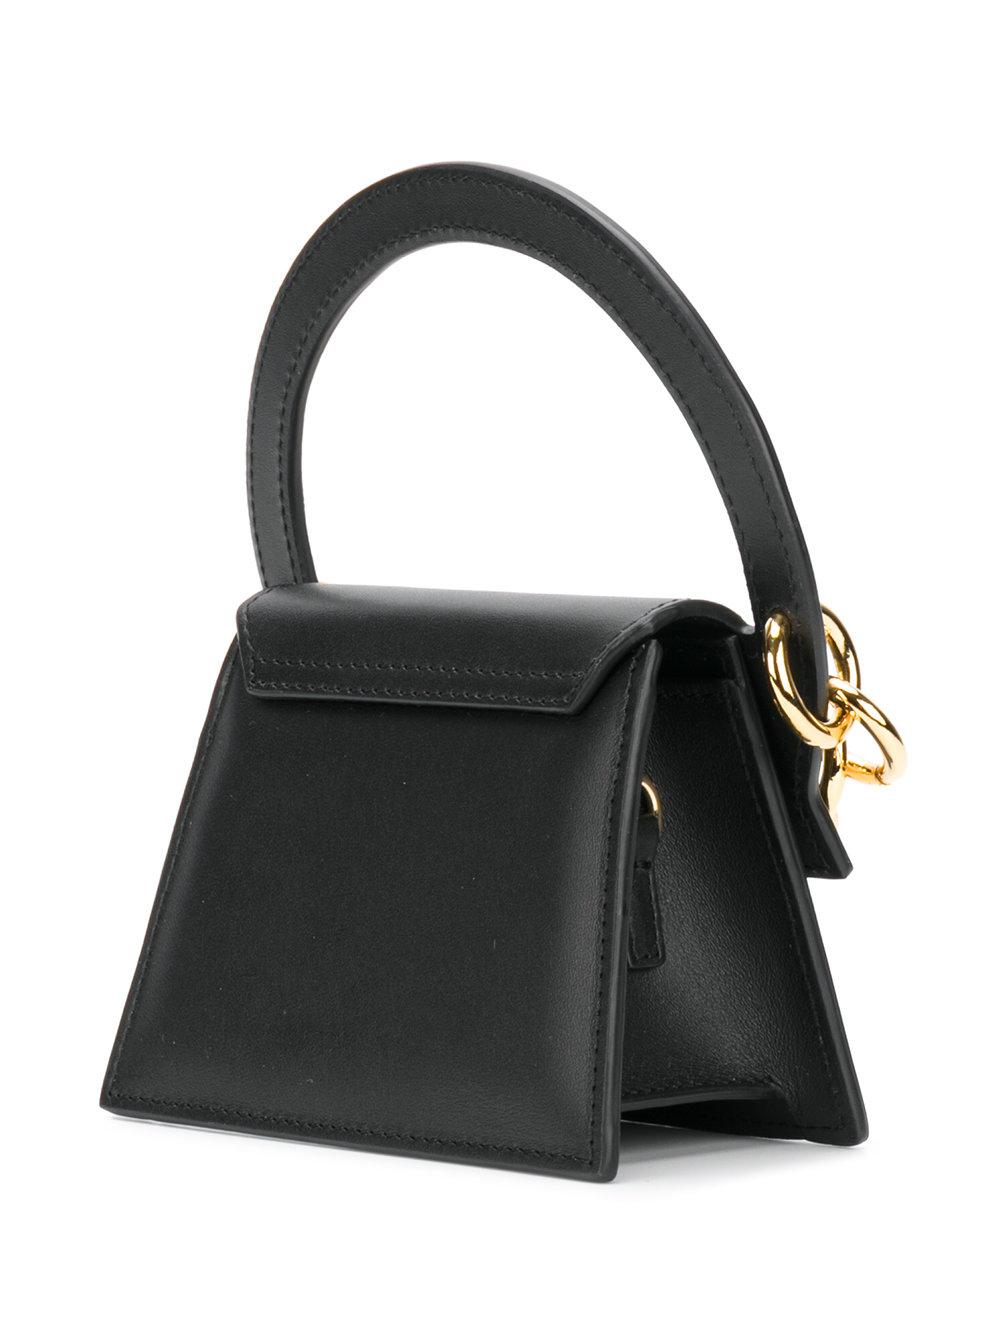 Jacquemus Leather Chain Detail Shoulder Bag in Black - Lyst